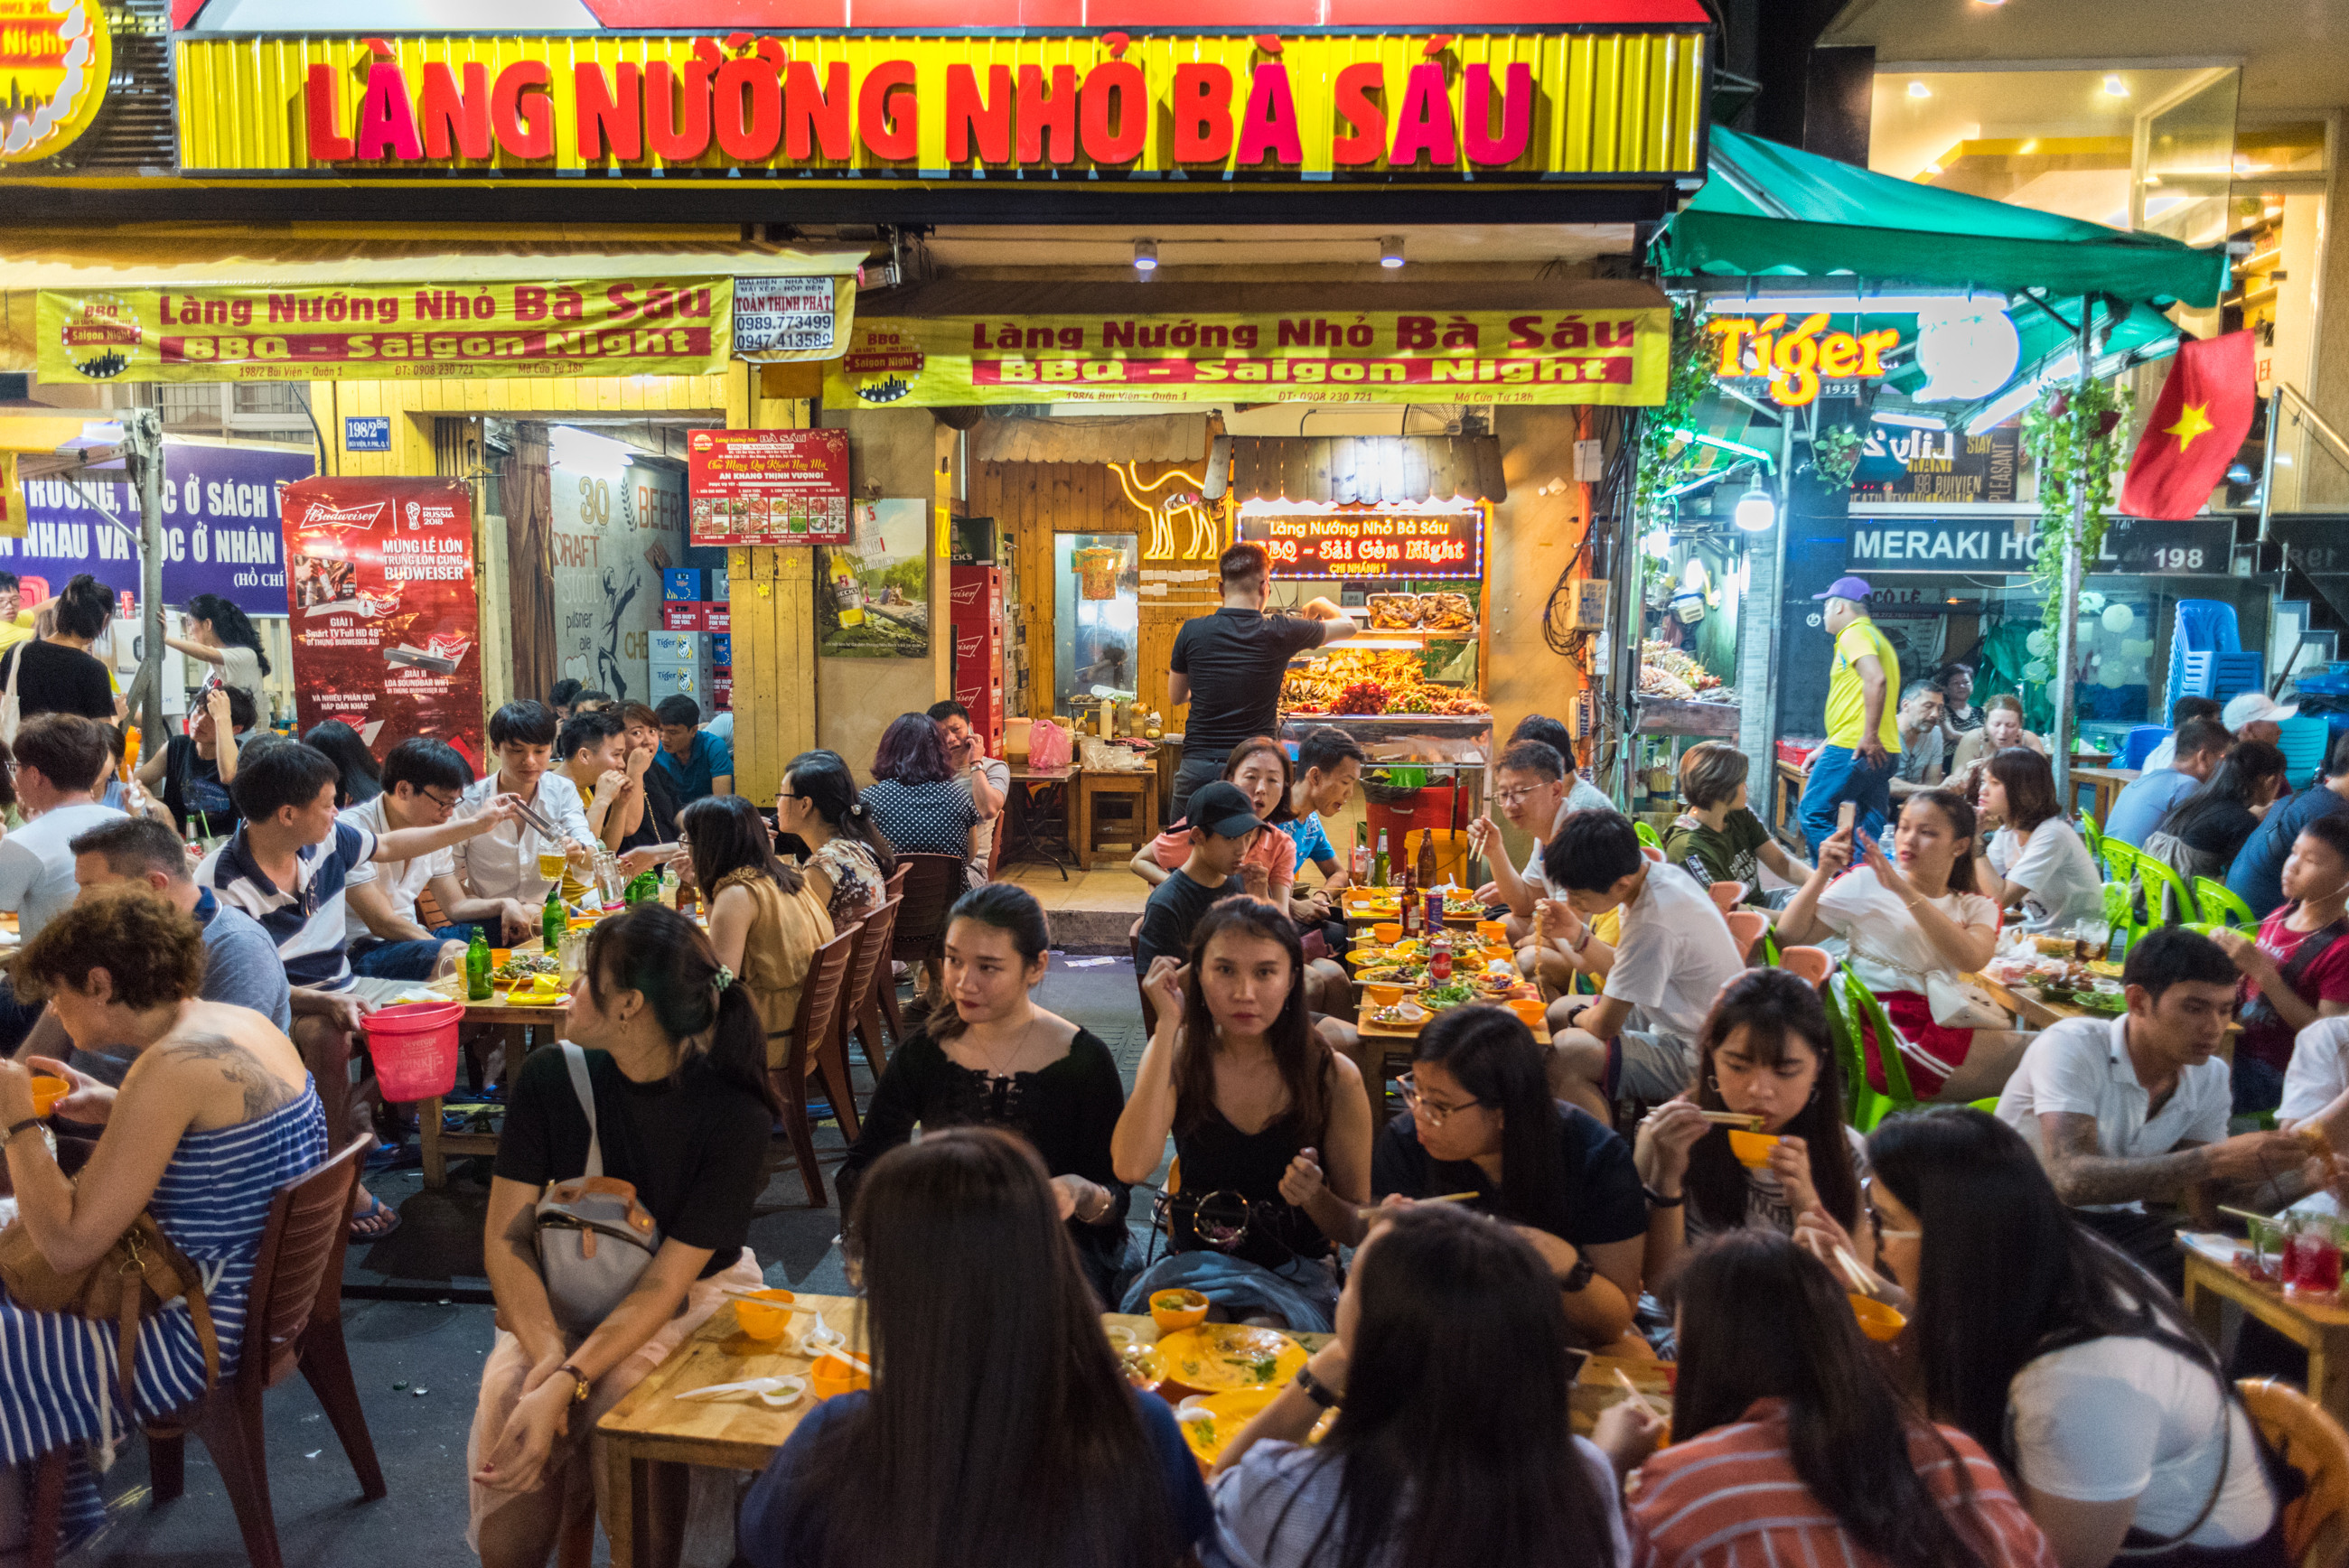 Groups of young Vietnamese people enjoy dinner at an open-air restaurant in Ho Chi Minh City. Vietnamese youth are starting to question the purpose of work in an economy where spoils are increasingly out of reach of the young. Photo: Shutterstock